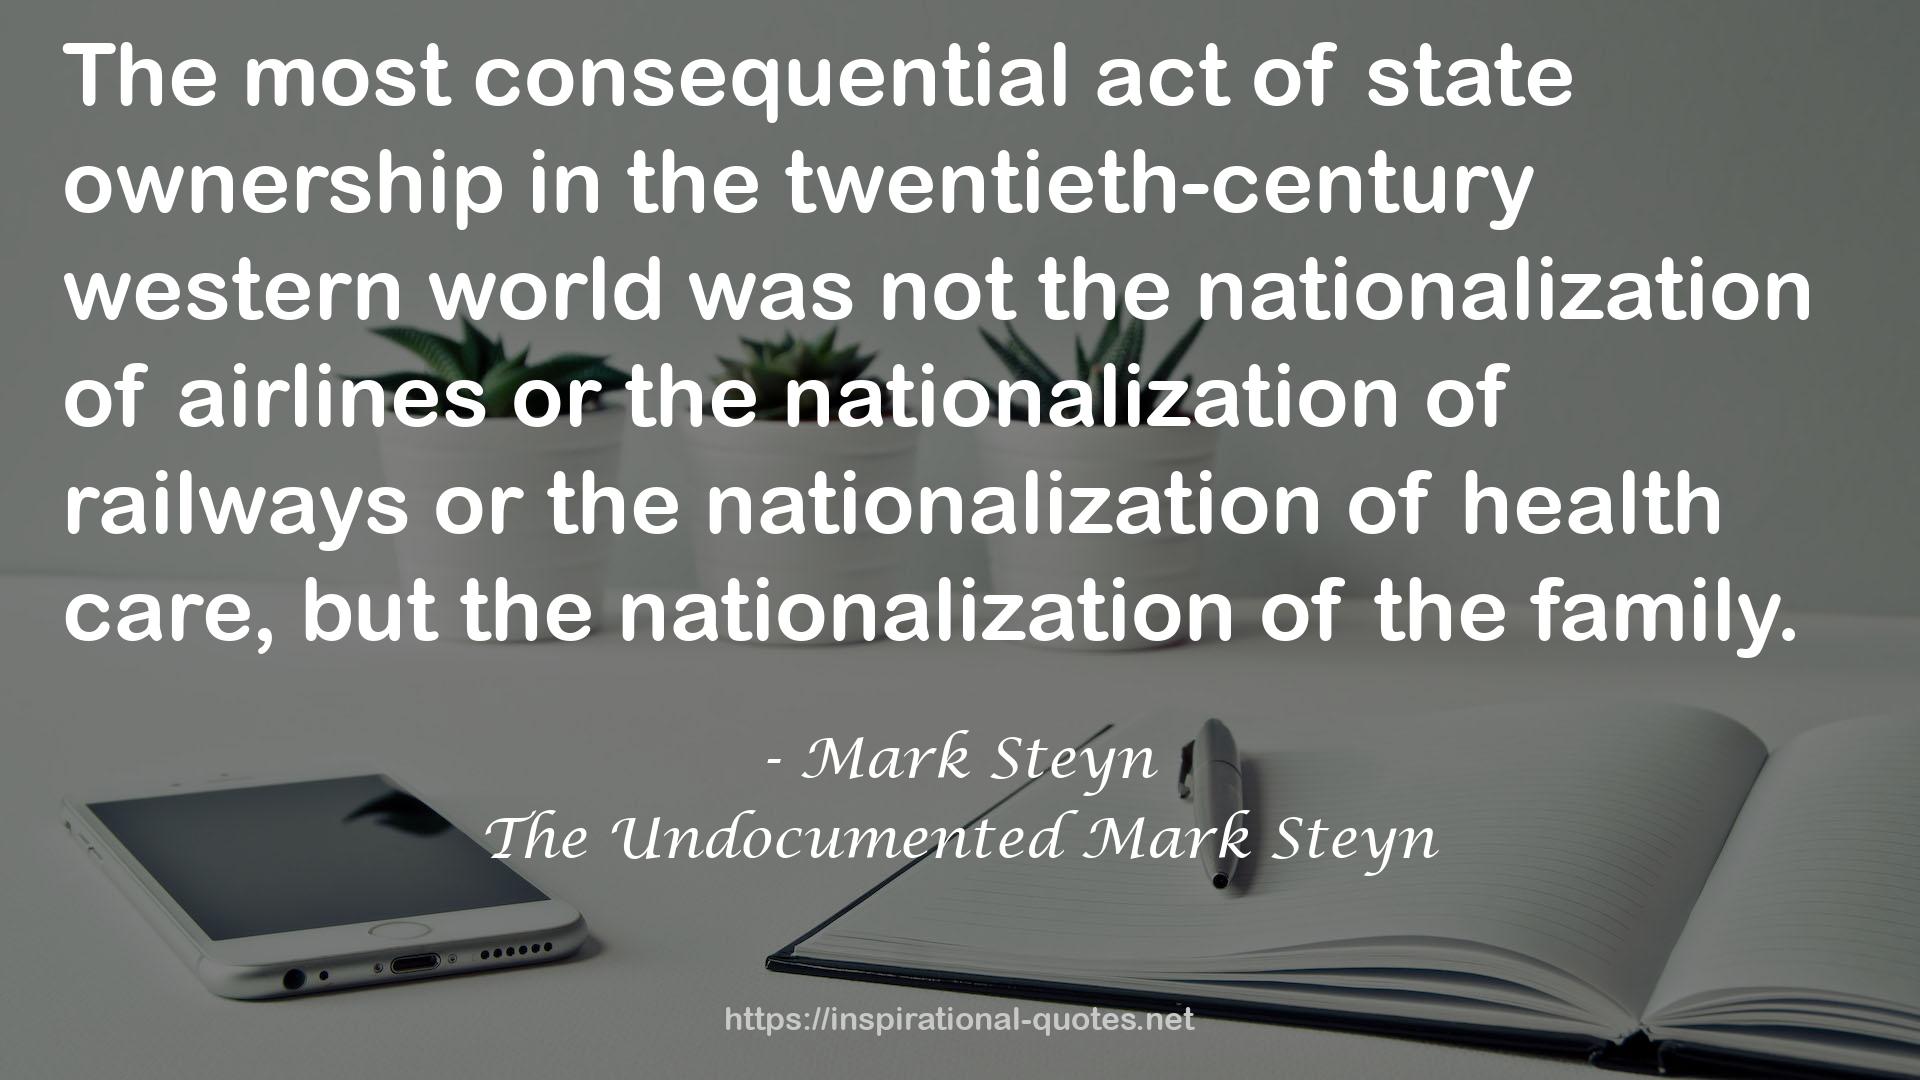 The Undocumented Mark Steyn QUOTES